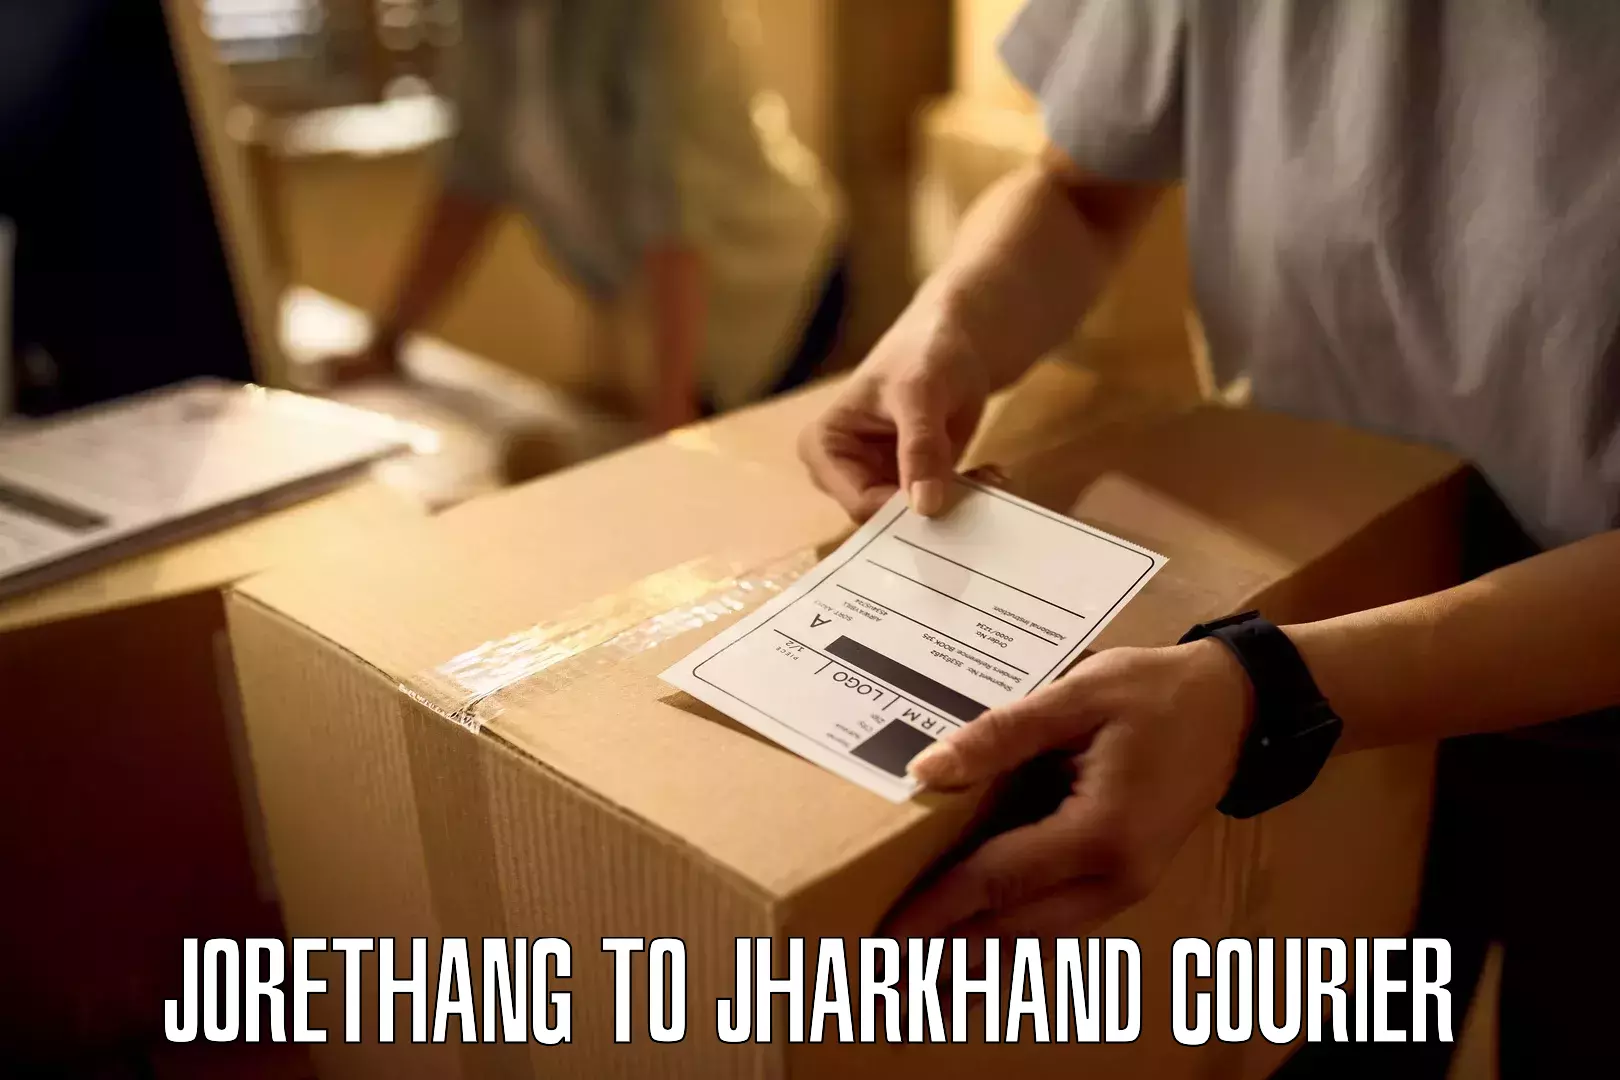 Nationwide shipping coverage Jorethang to Jamshedpur